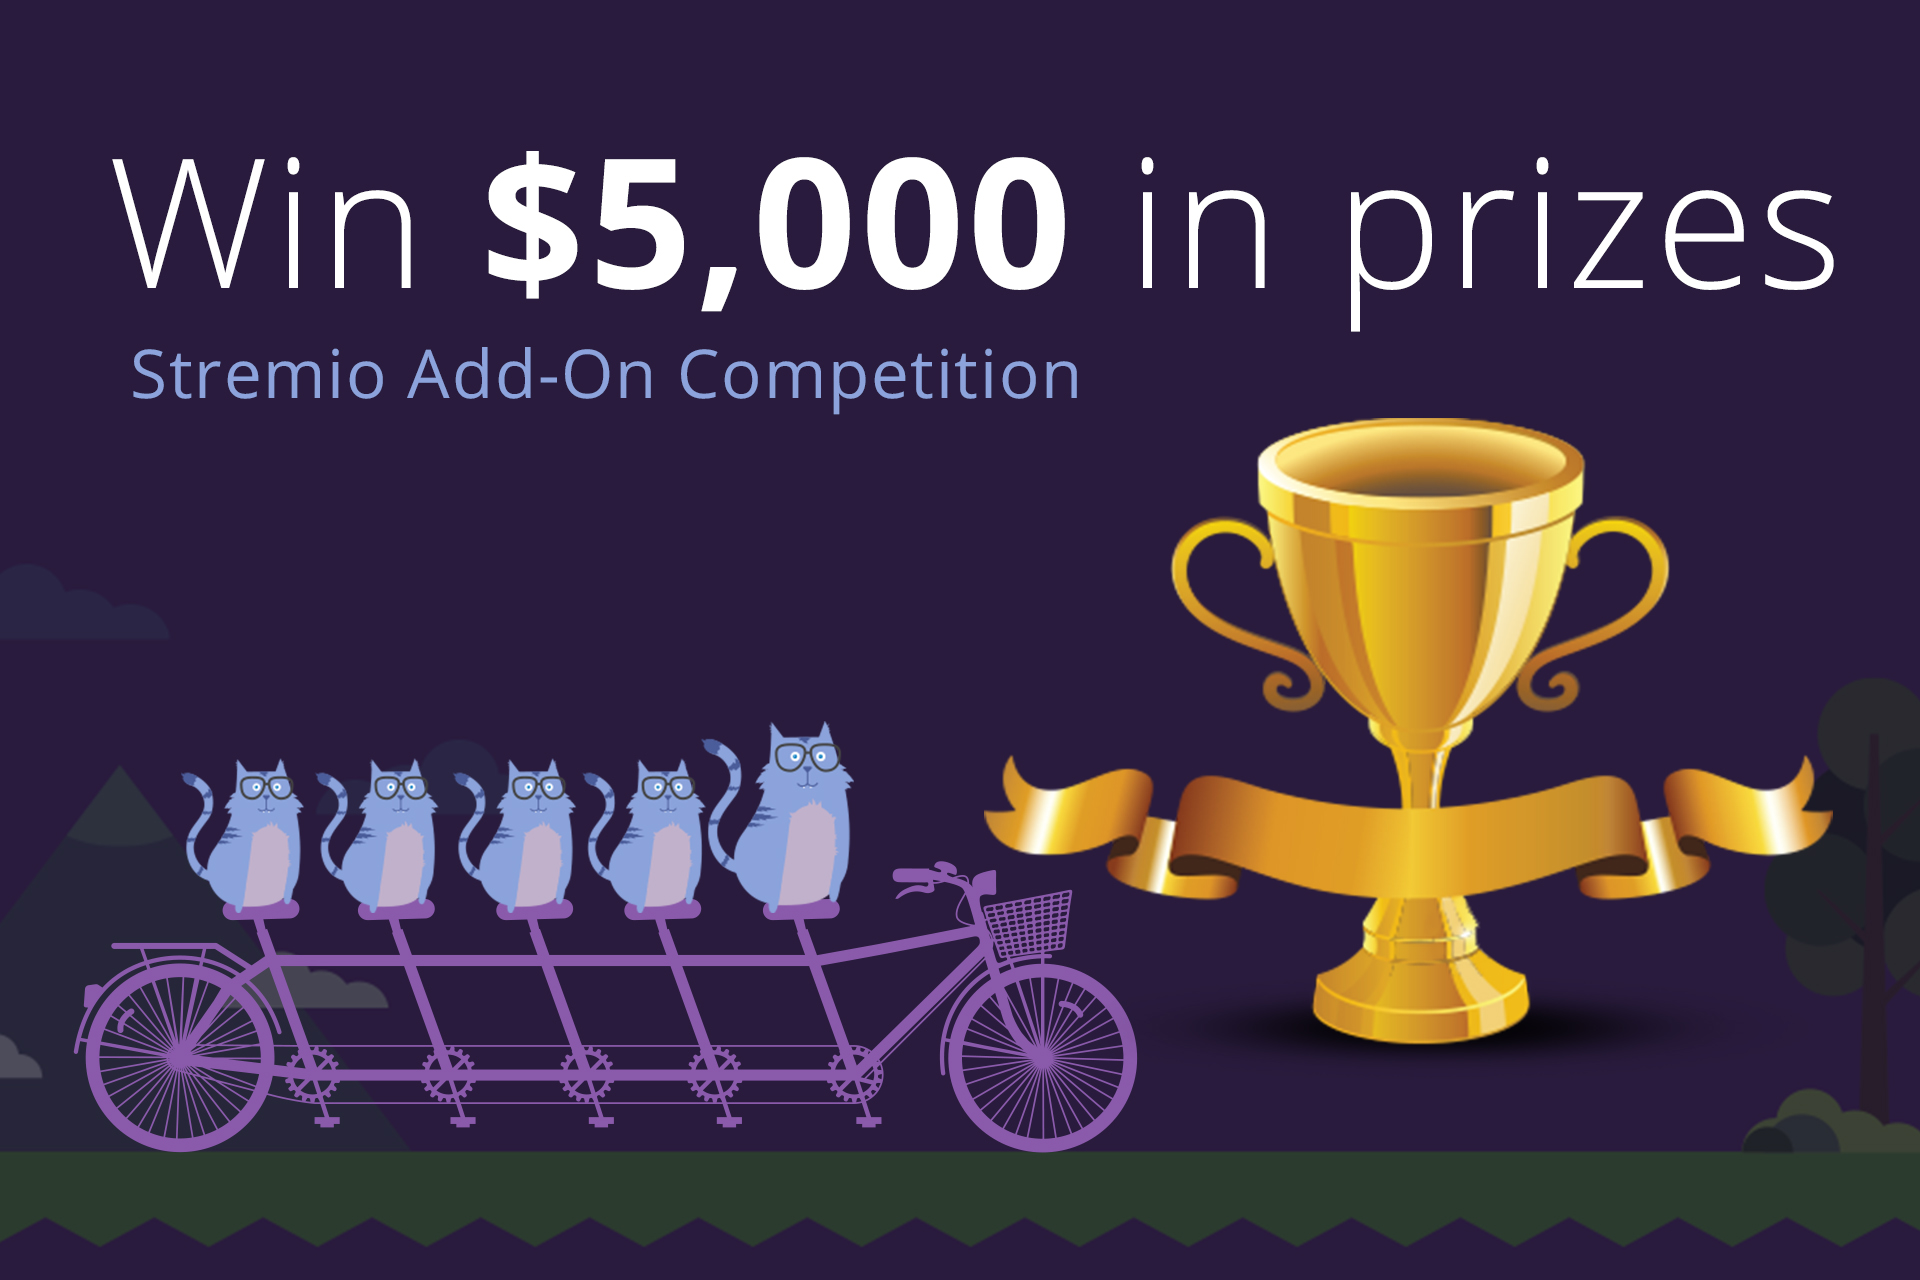 Stremio Add-On Contest Win $5,000 in Prizes